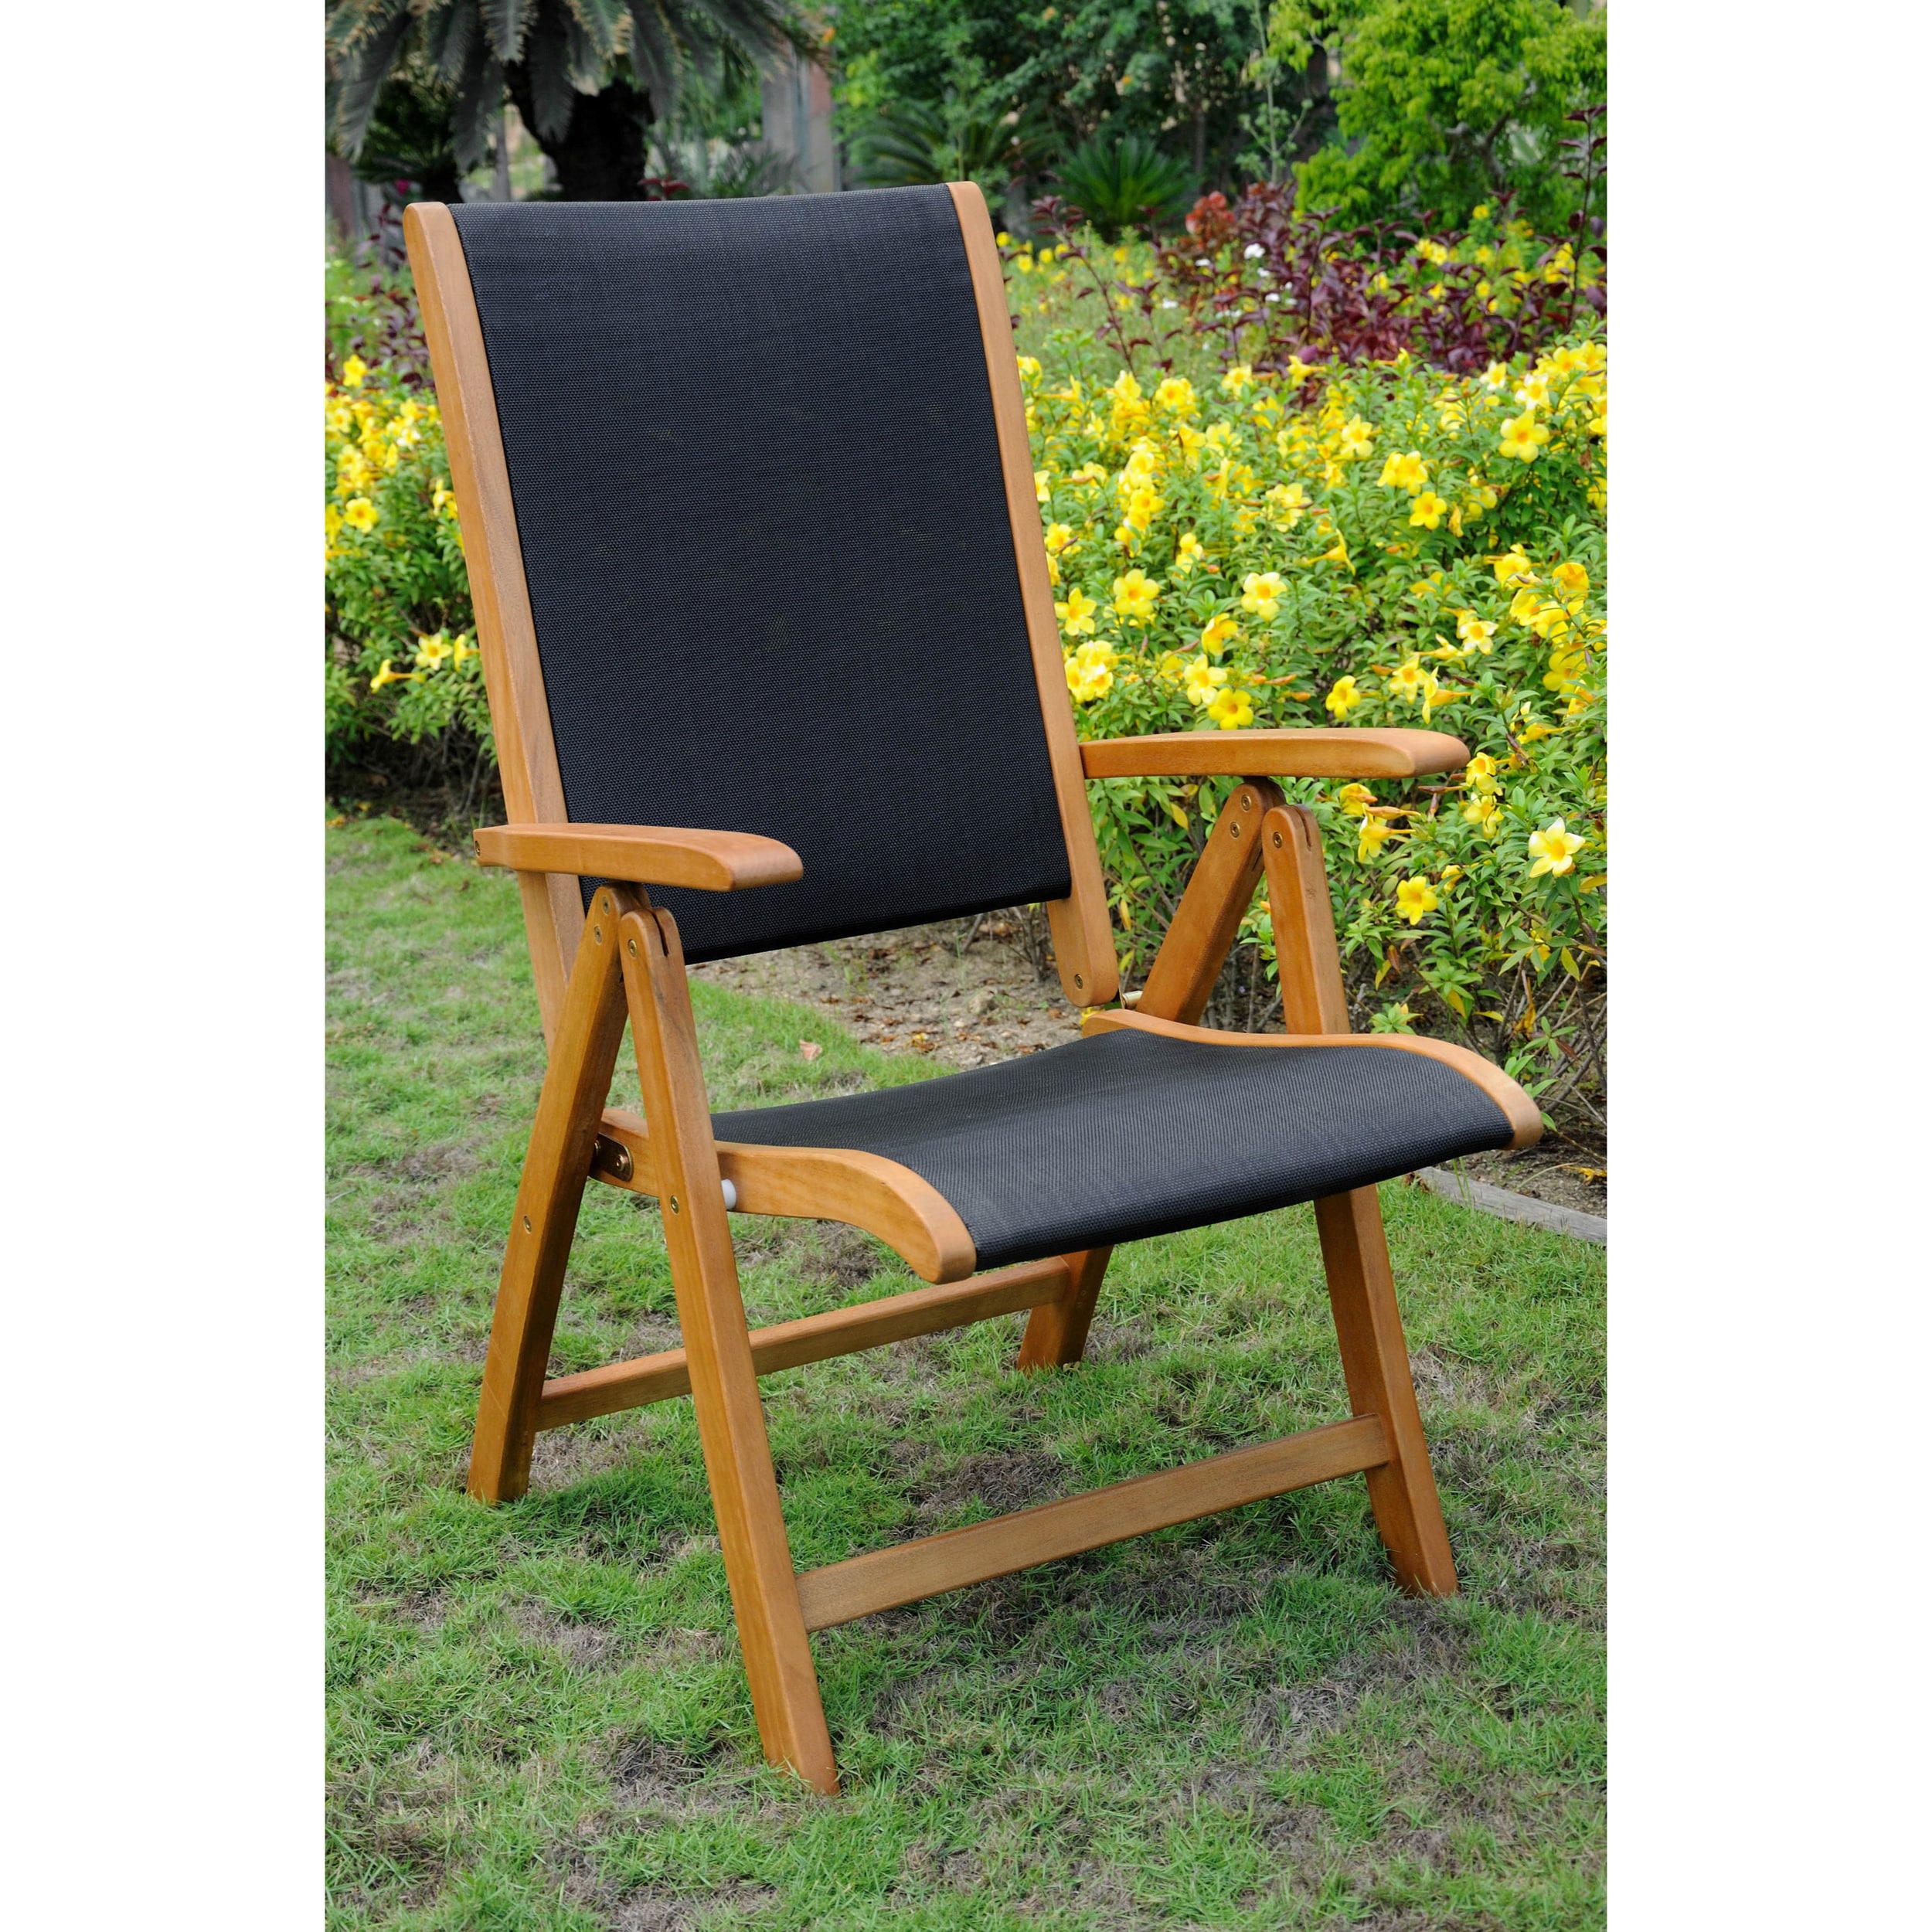 International Caravan Royal Tahiti Segovia Seat 5 position Folding Arm Chair (set Of 2) (Light Teak Oil FinishMaterials Yellow Balau HardwoodFinish Natural Oil Stain FinishWeather resistantTextweave Seat and Back SupportsDimensions 44 inches high x 28.